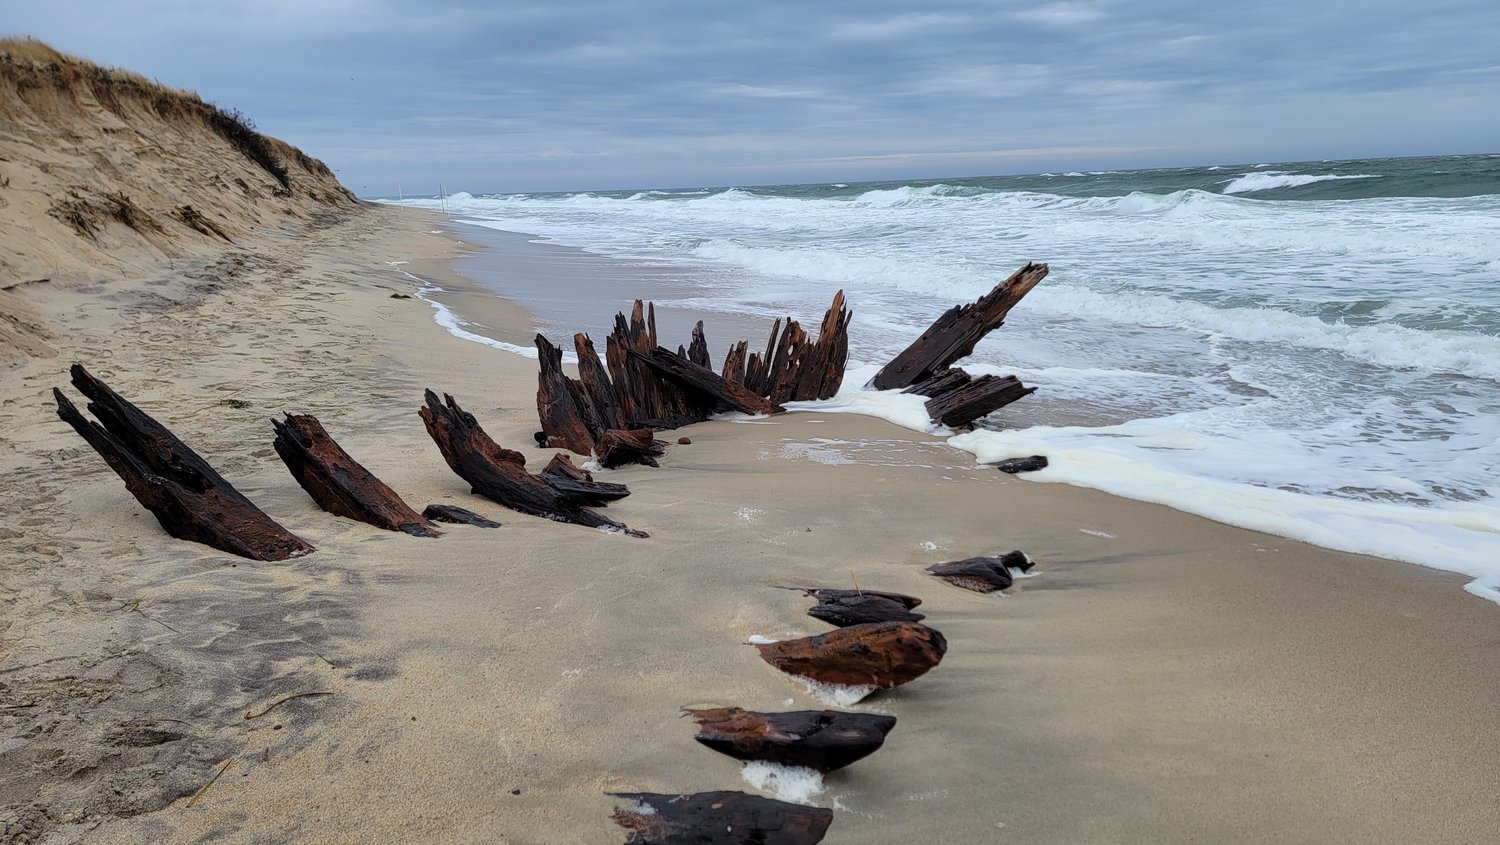 This shipwreck emerged on the south shore in early December.